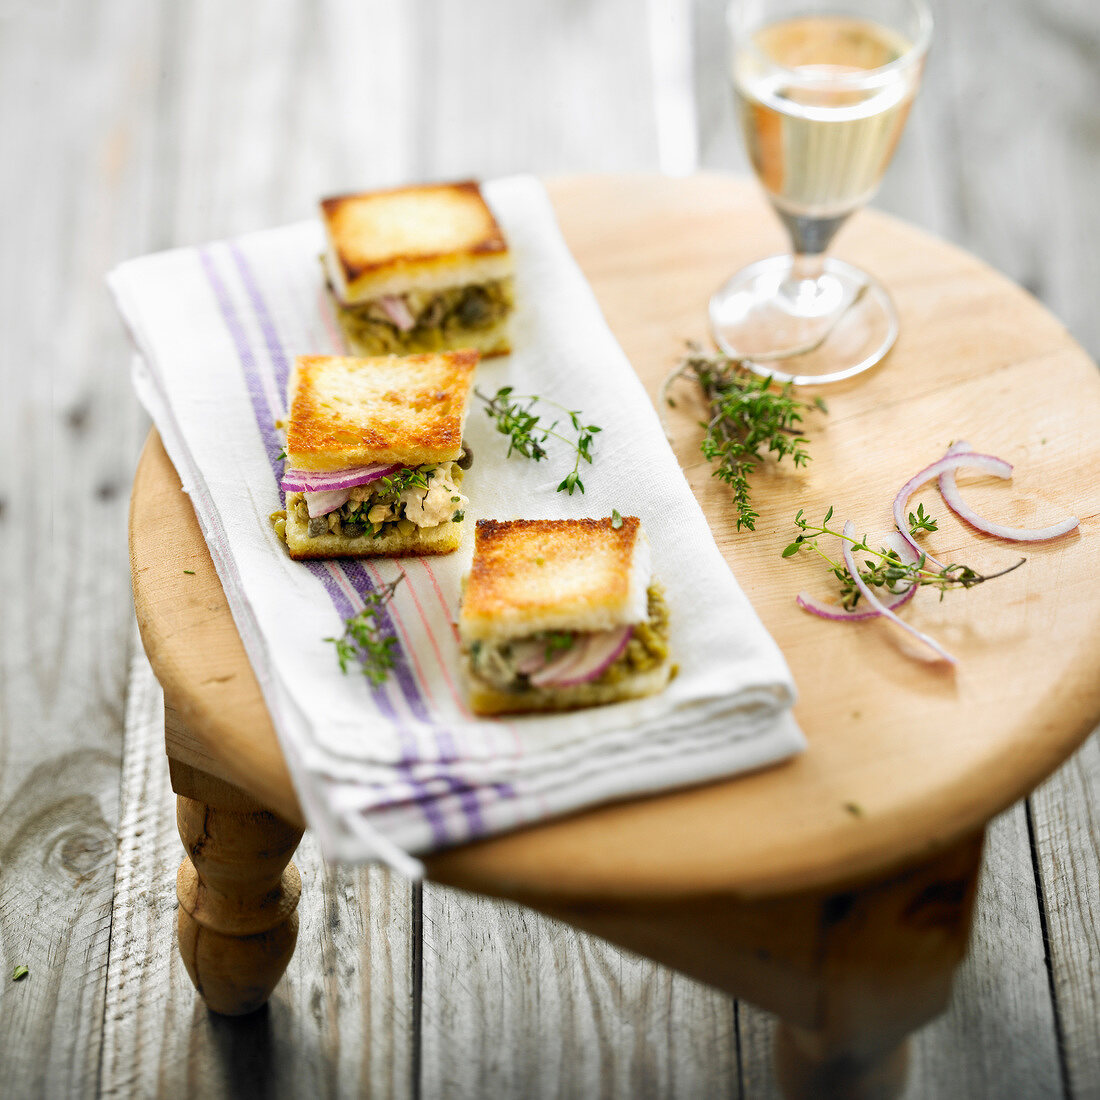 Onion and tapenade toasted sandwich